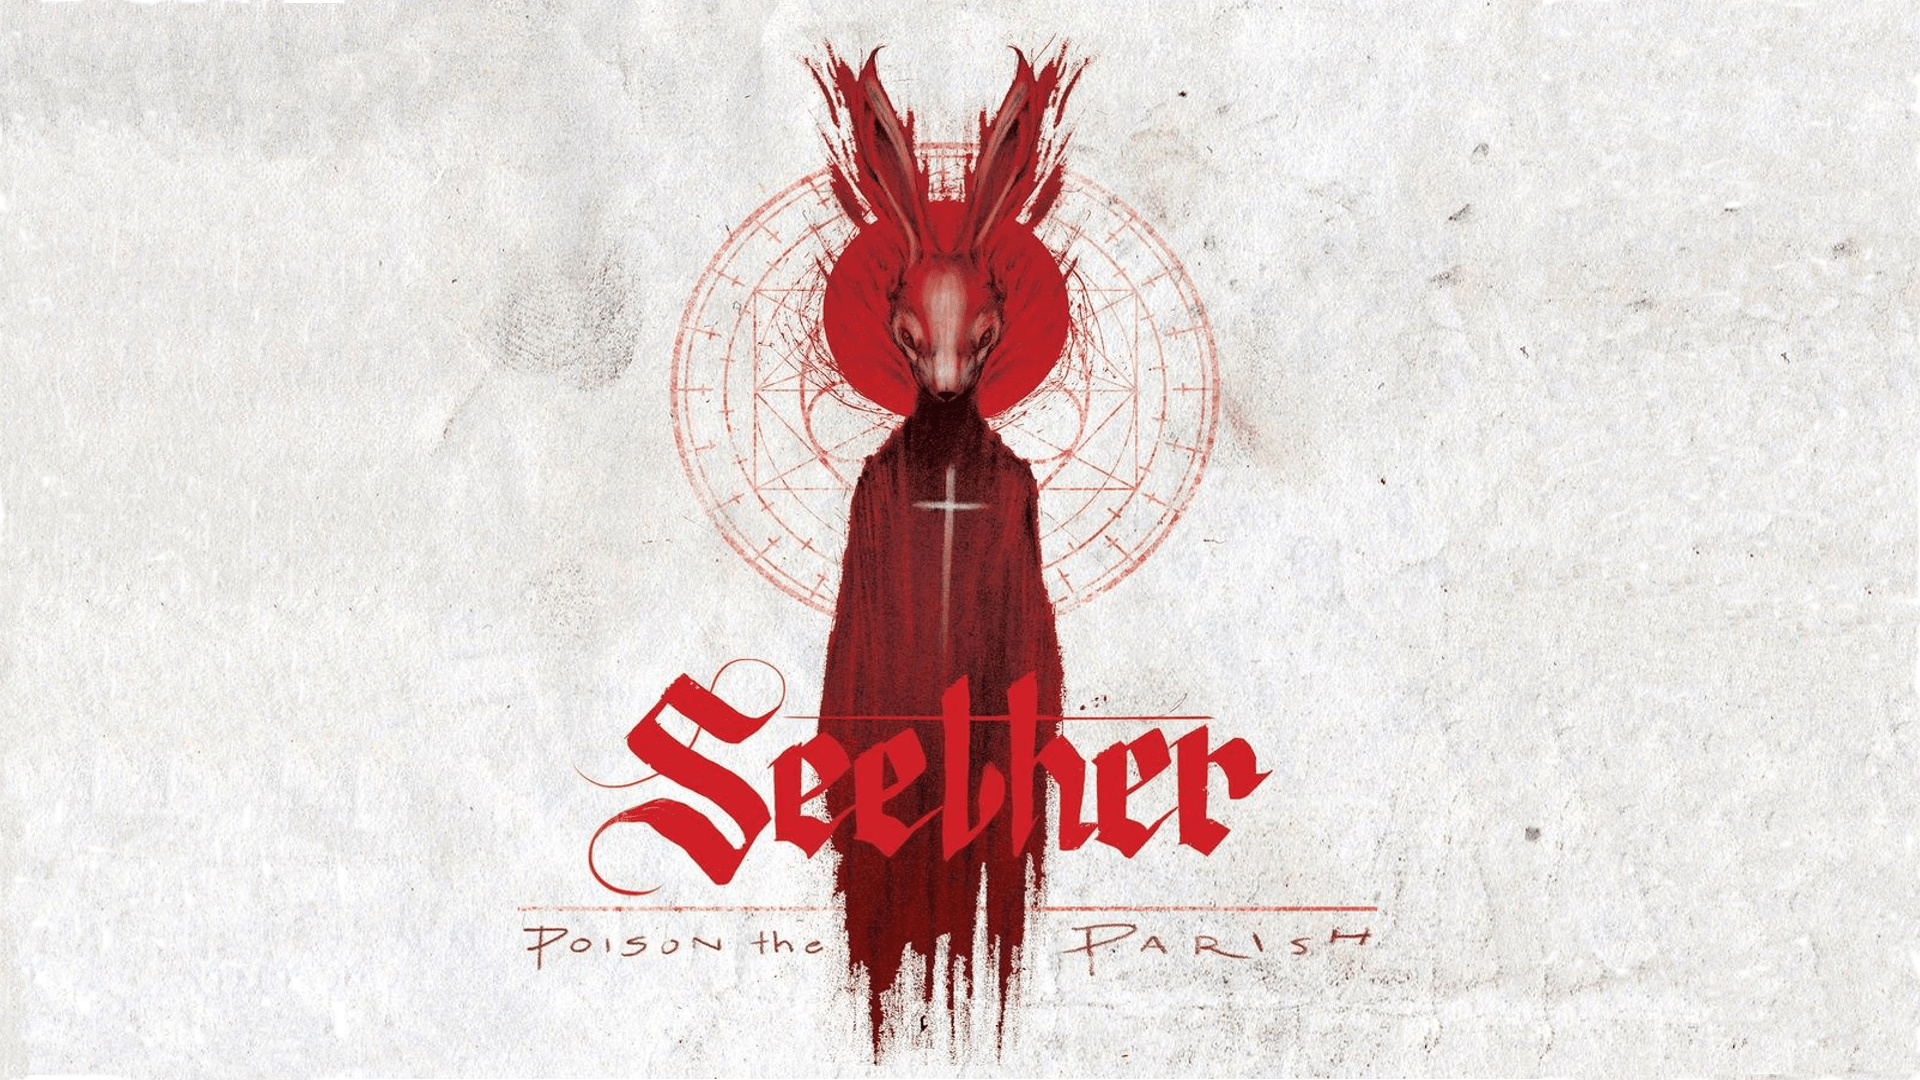 Seether Wallpapers - Top Free Seether Backgrounds 1920x1080